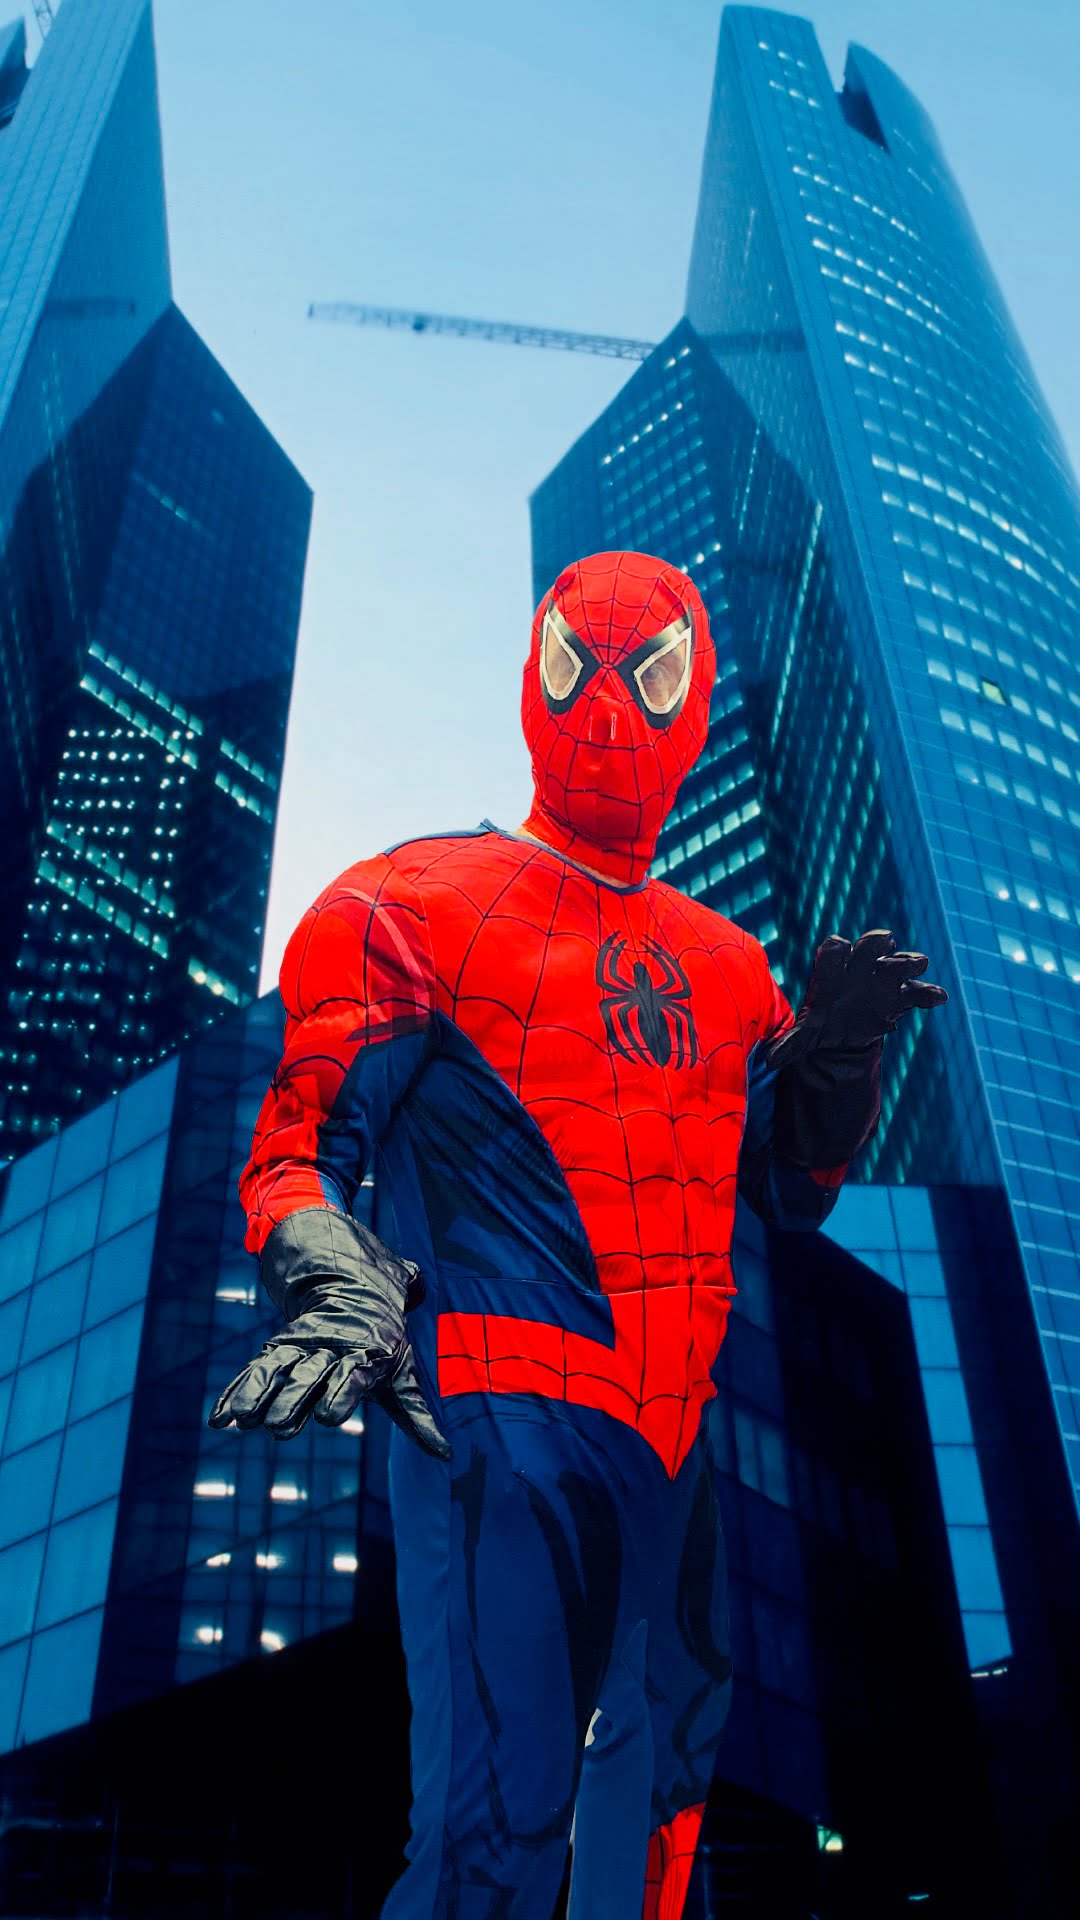 Featured image for “Spiderman”